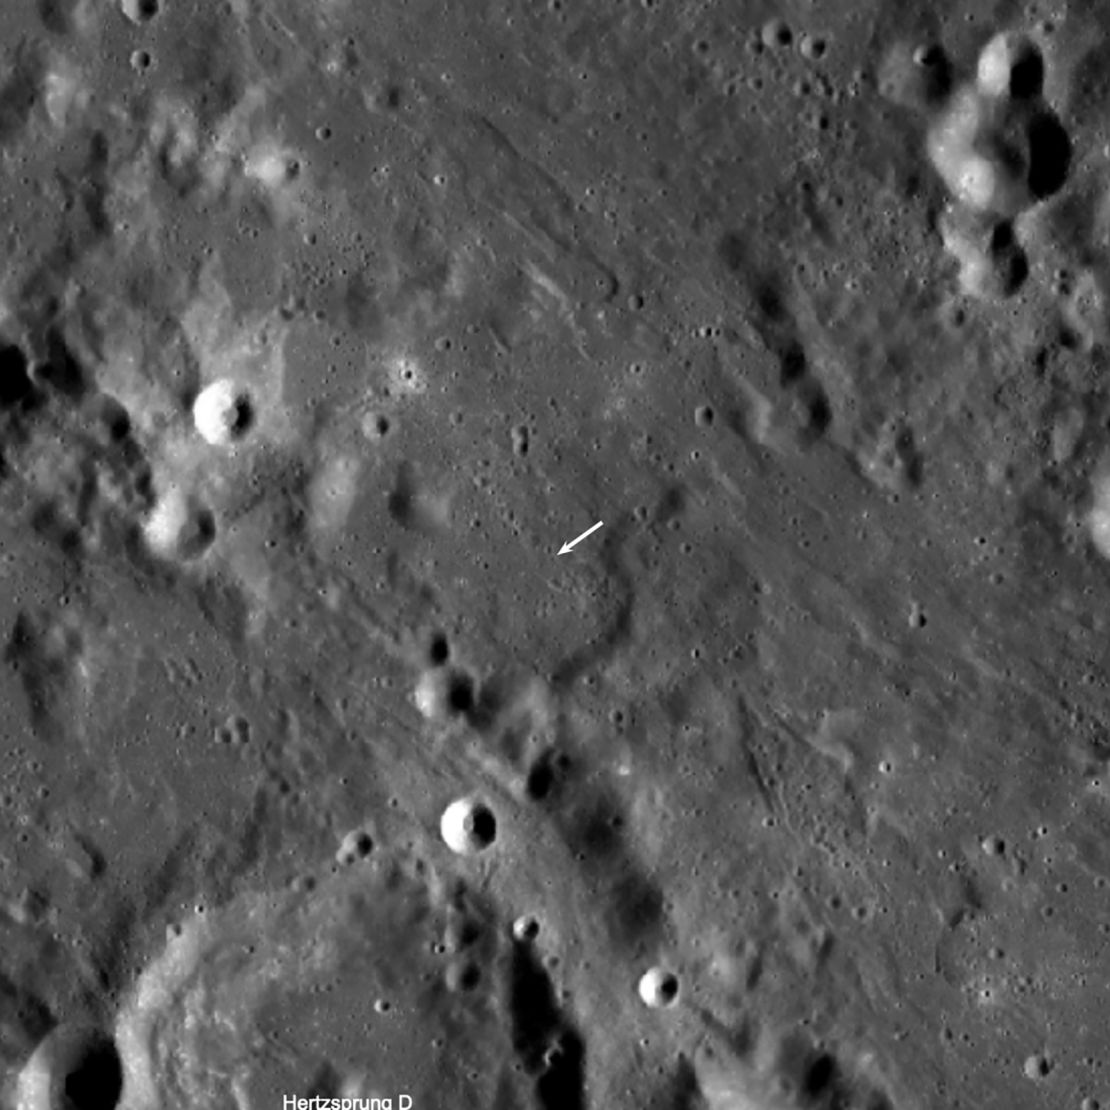 The new crater is smaller than others and not visible in this view, but its location is indicated by the white arrow. 